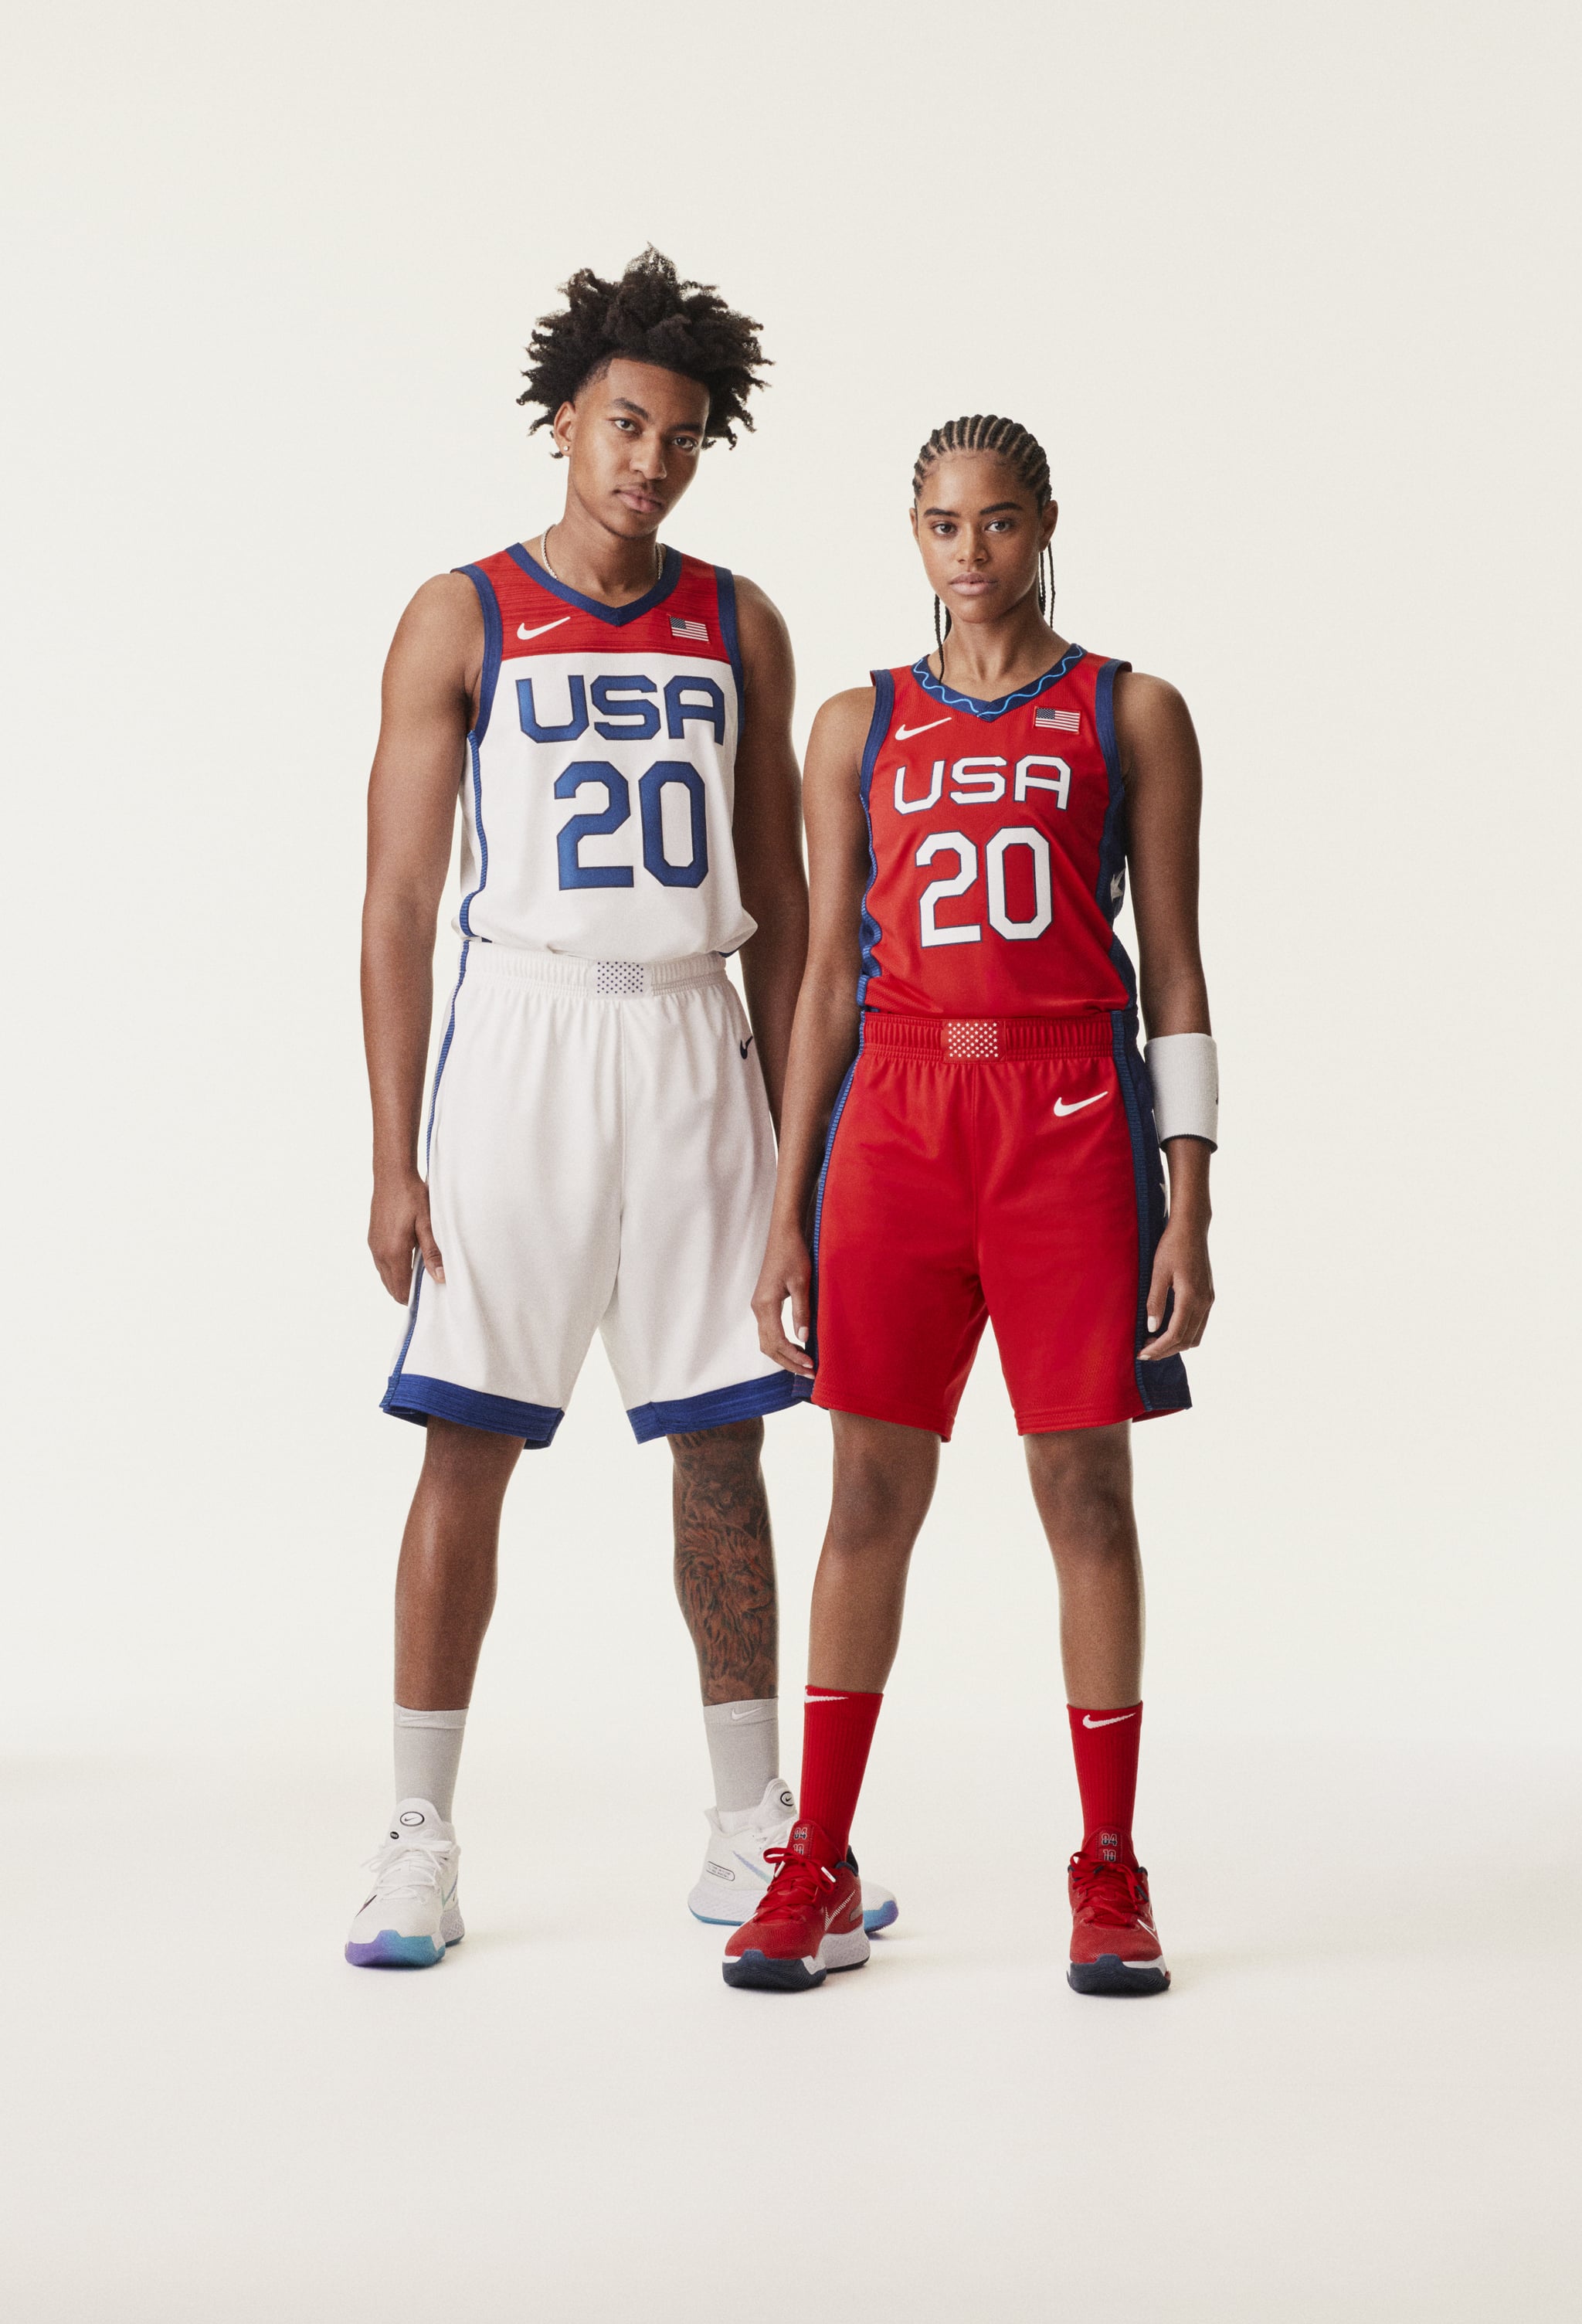 Team Usa 21 Olympic Basketball Uniforms Skateboarding Soccer Track Nike S 21 Olympic Uniforms Are So Sharp And Clean Popsugar Fitness Photo 5